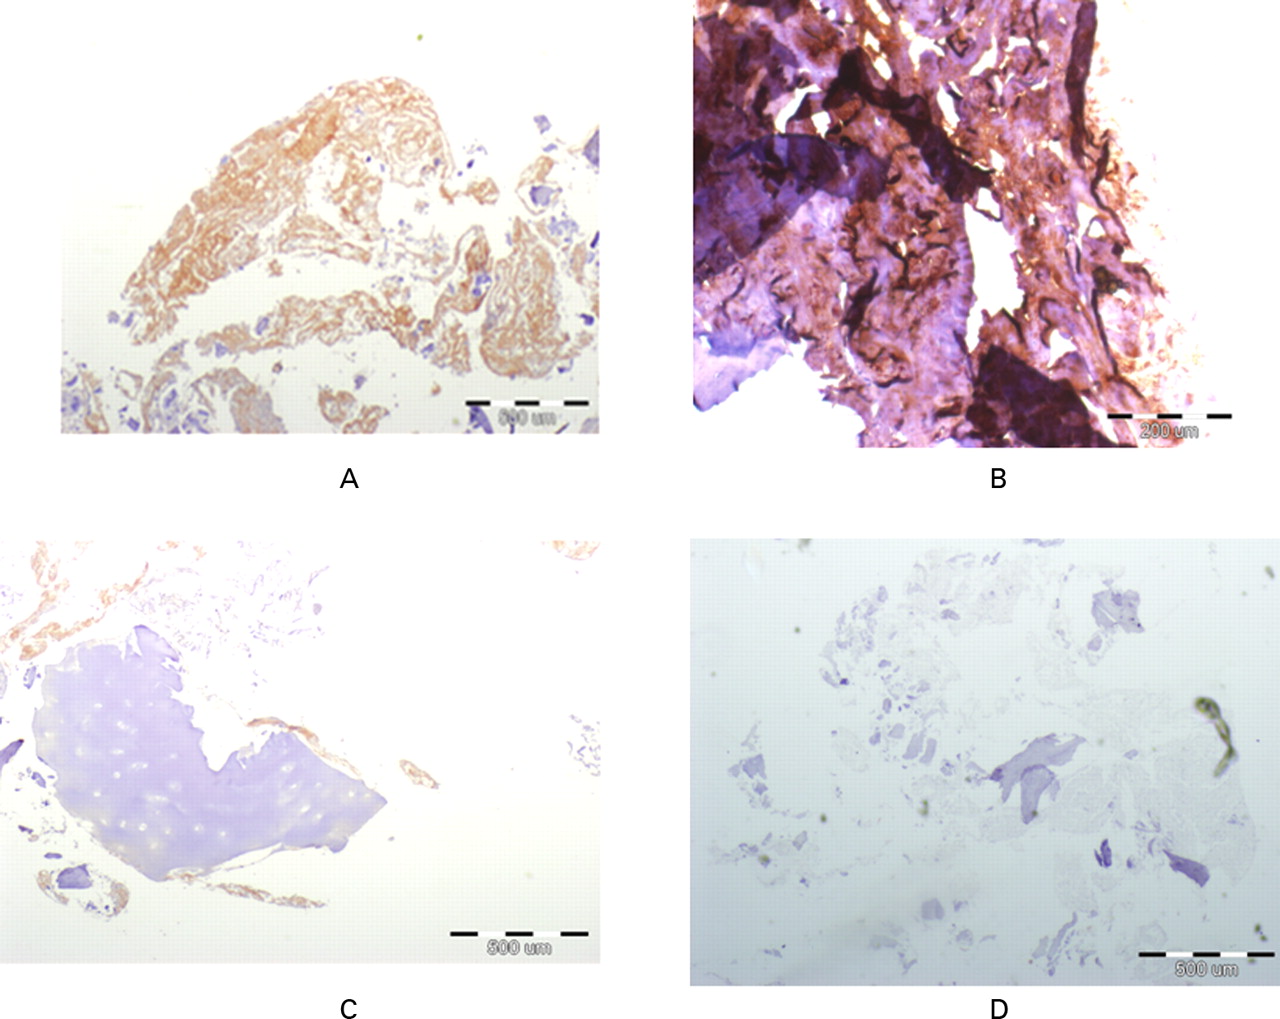 Fig. 5 
          Micrographs showing immunohistochemical stainings
for collagen 1 (brown colour) in a) experimentally generated tissue, b)
normal cancellous bone (positive control), c) cartilage (stained
negative control) and d) experimentally generated tissue without antibody
staining (not stained negative control). Similar positive staining
is evident in the generated tissue and in normal bone sample. Negative
controls show no staining to collagen 1.
        